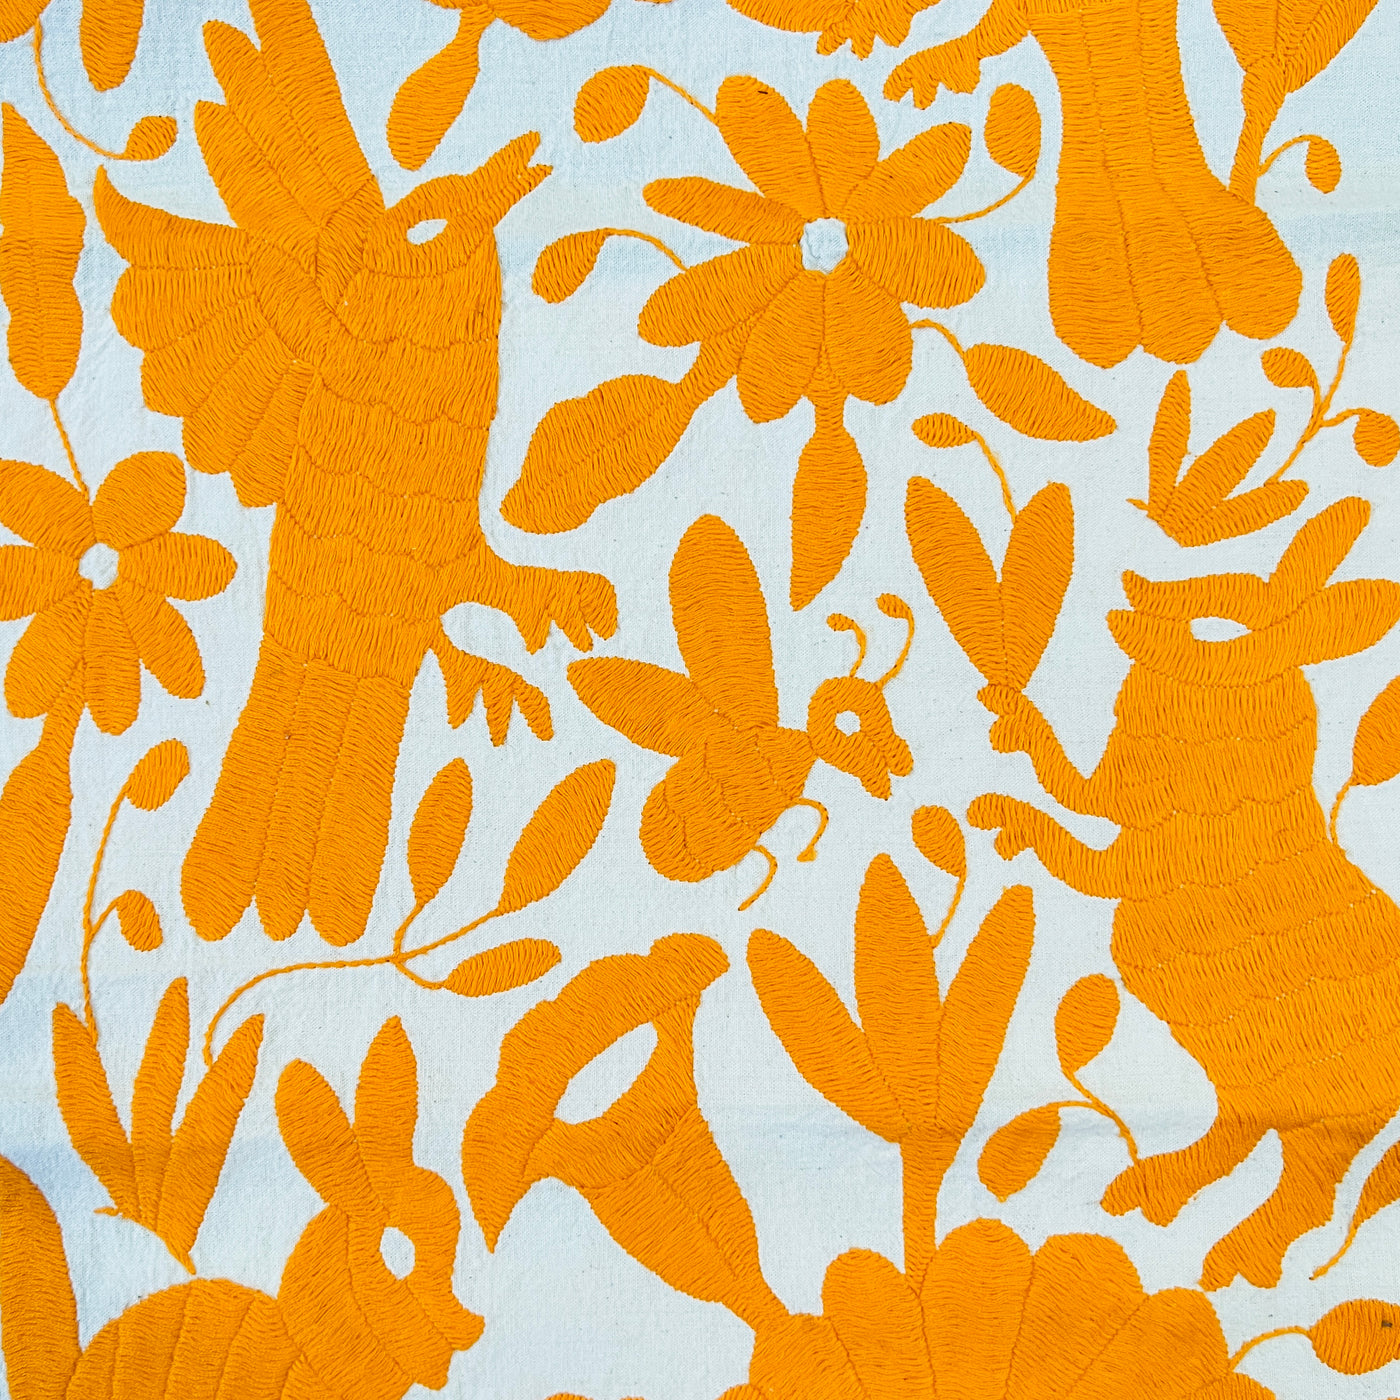 enhanced view of orange floral and fauna scenery detail embroidered on off white table runner